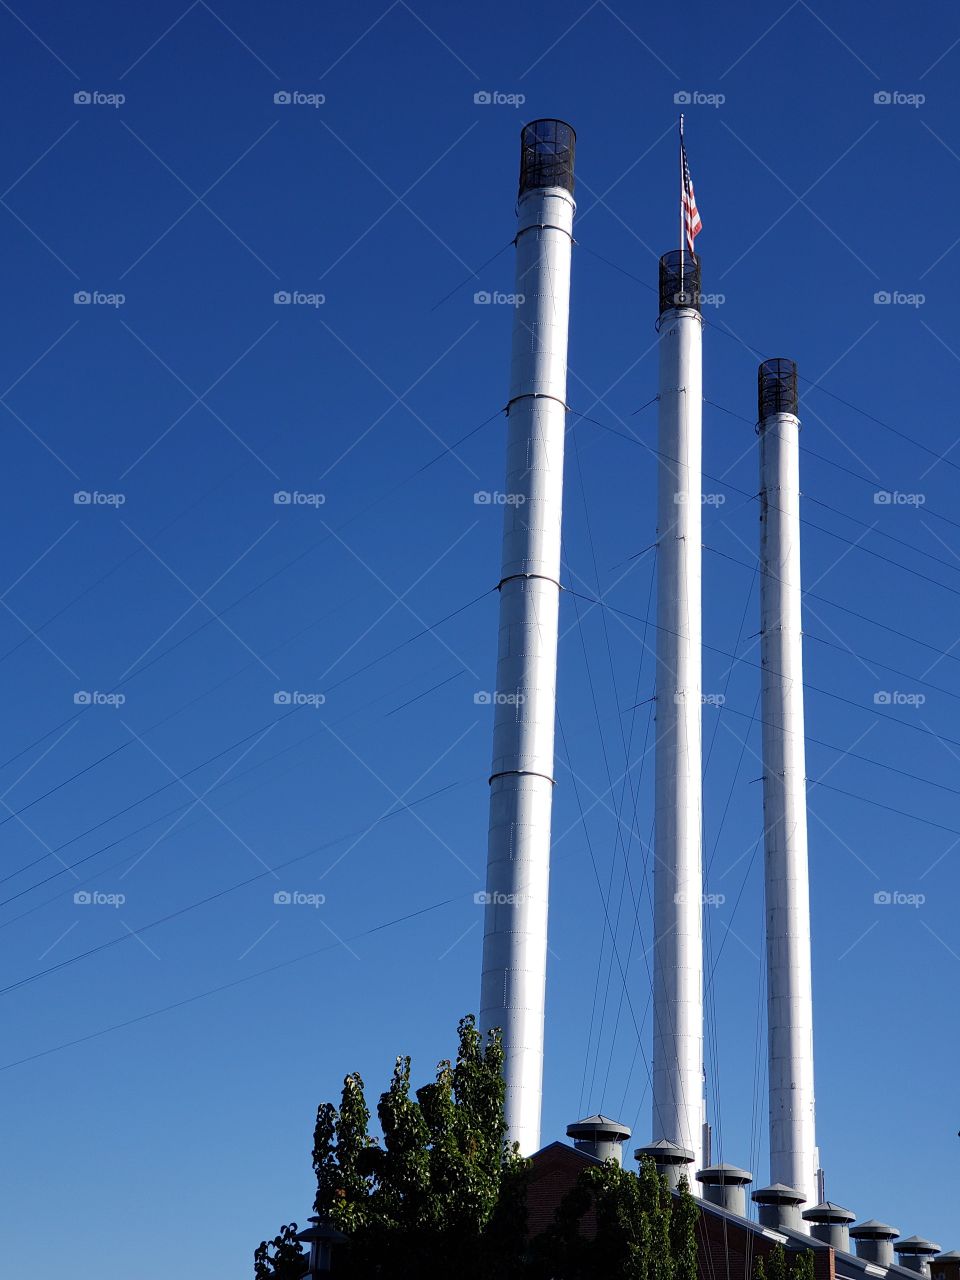 Old smoke stacks from an Oregon Mill no longer in use with an American flag mounted at the top against clear blue skies on a fall morning. 